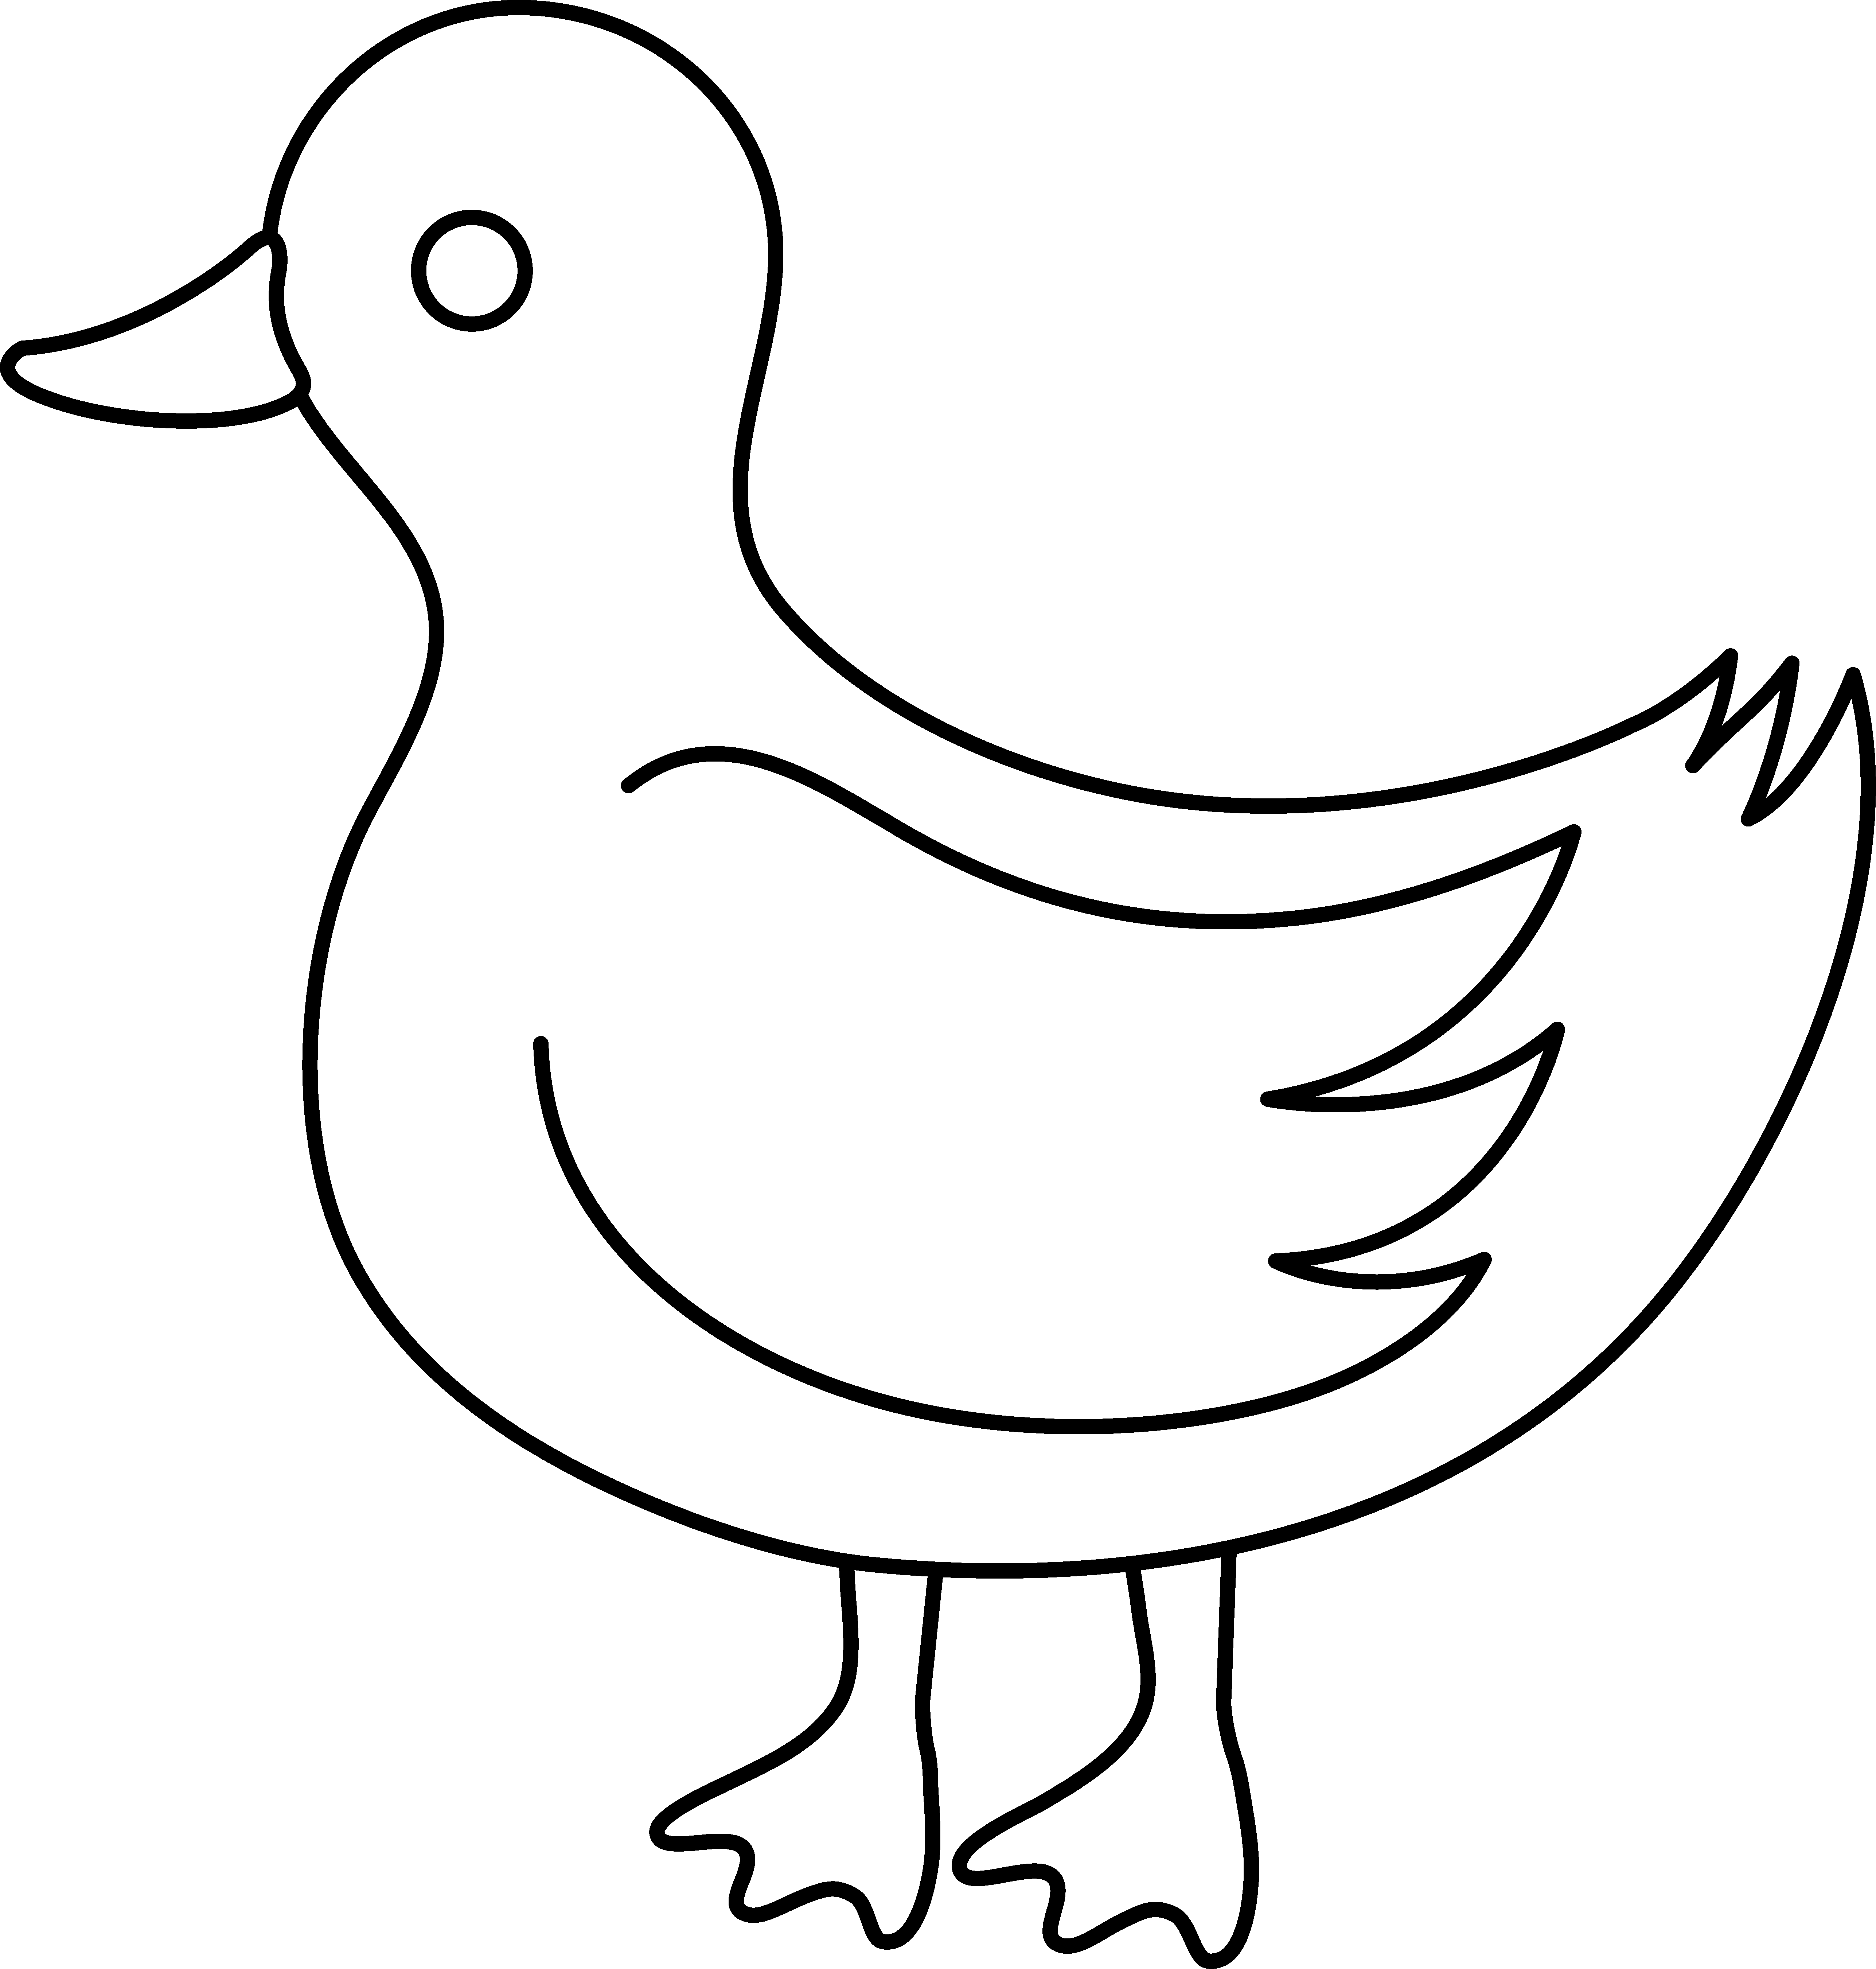 Cartoon duck clipart black and white outline - ClipArt Best - ClipArt Best